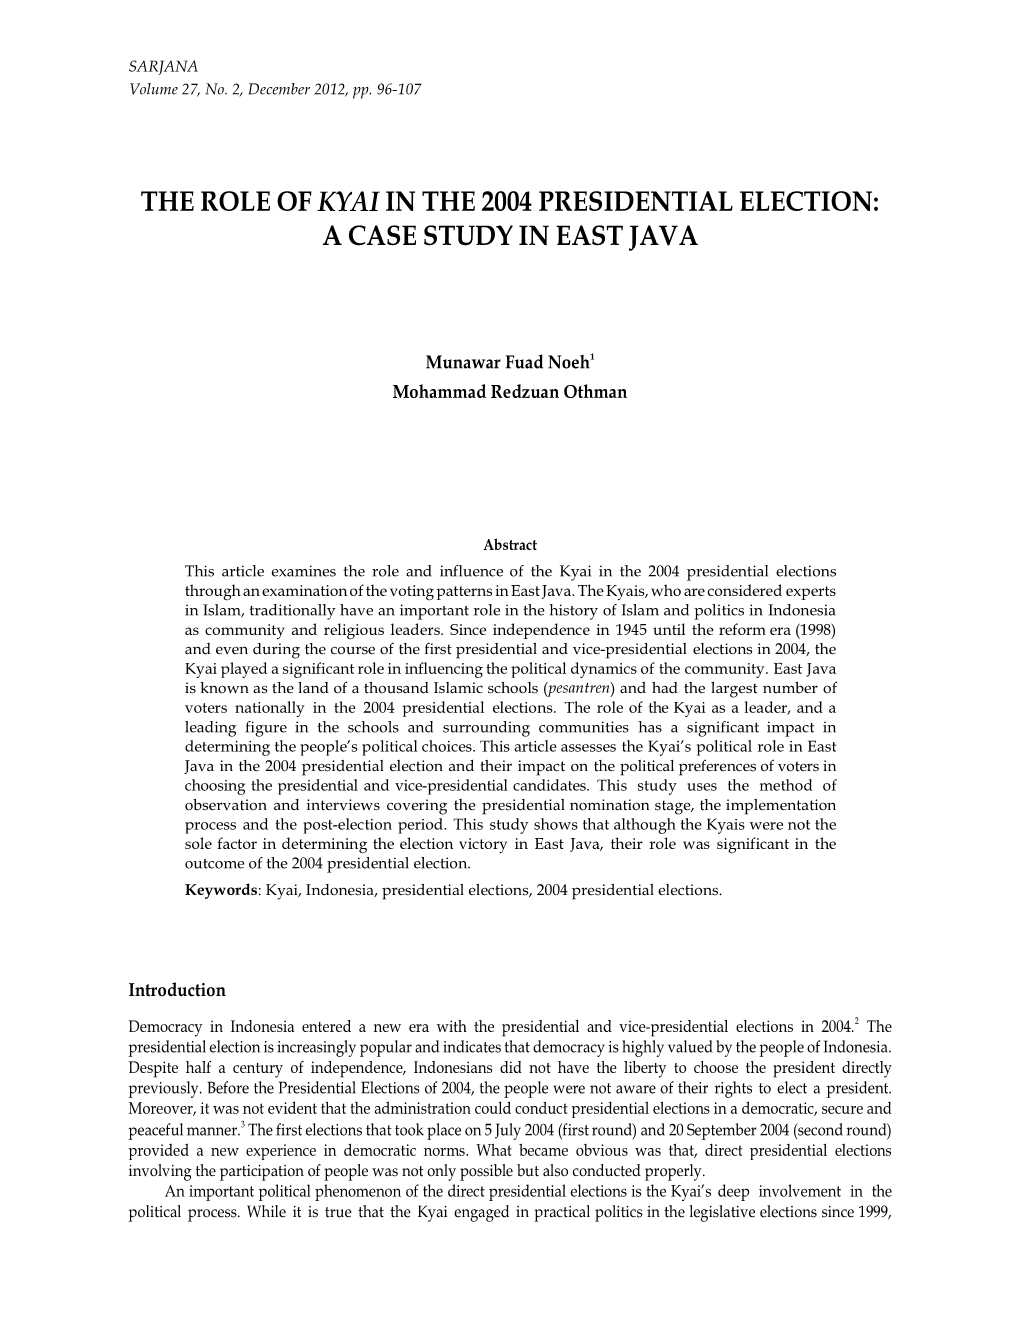 The Role of Kyai in the 2004 Presidential Election: a Case Study in East Java